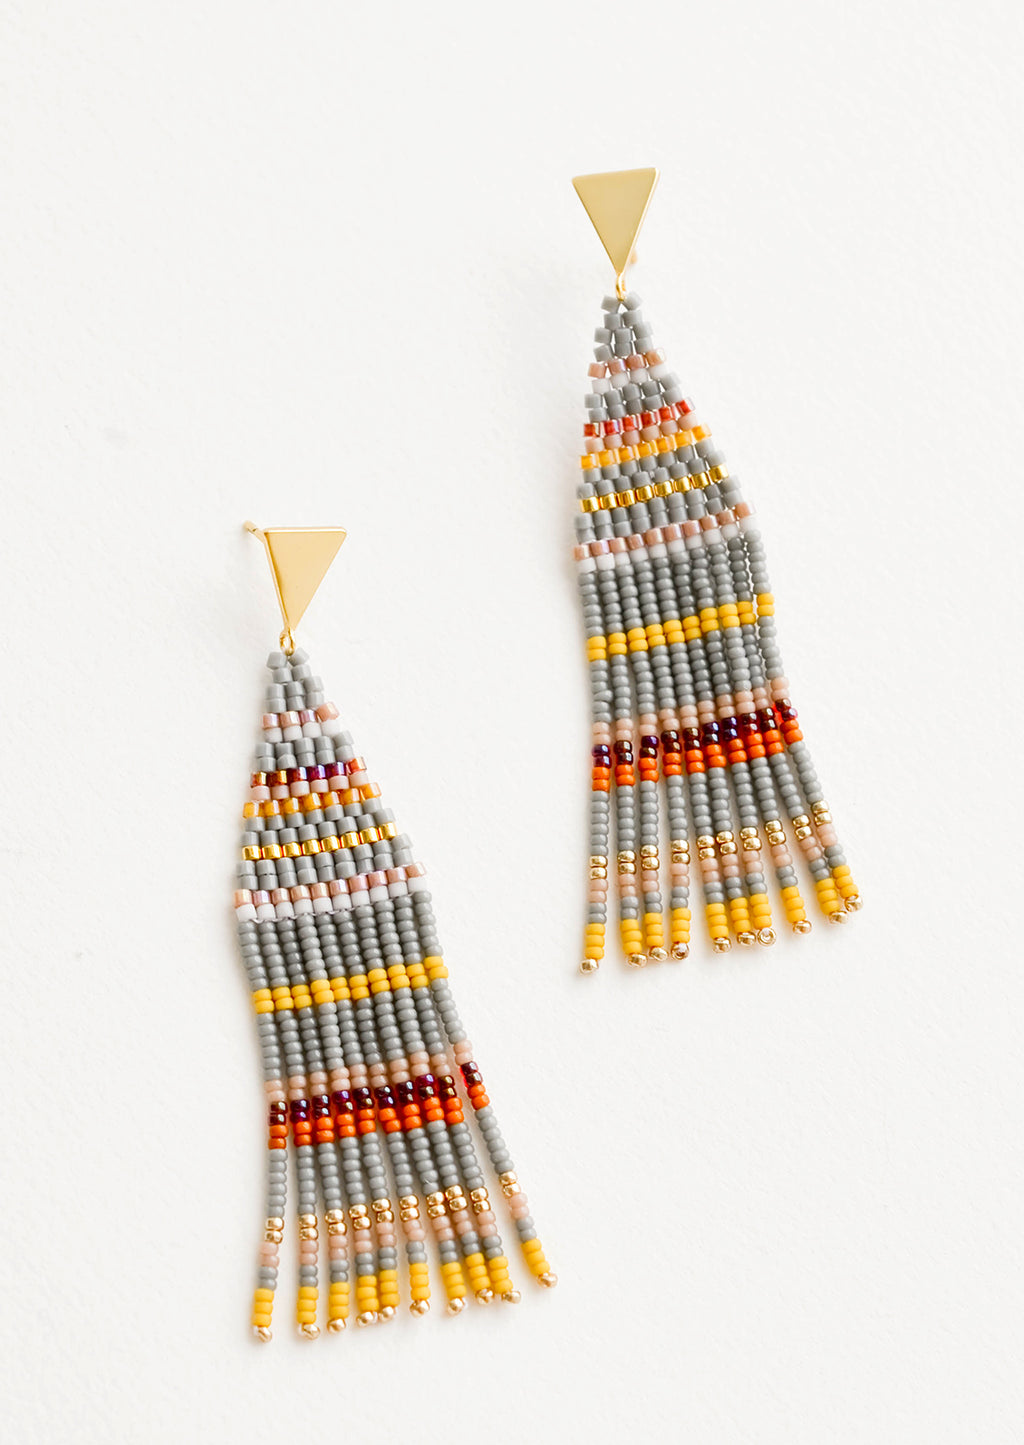 Pewter Multi: Fringe beaded earrings in gray with yellow, orange, gold, and maroon horizontal stripes on a triangular gold post.